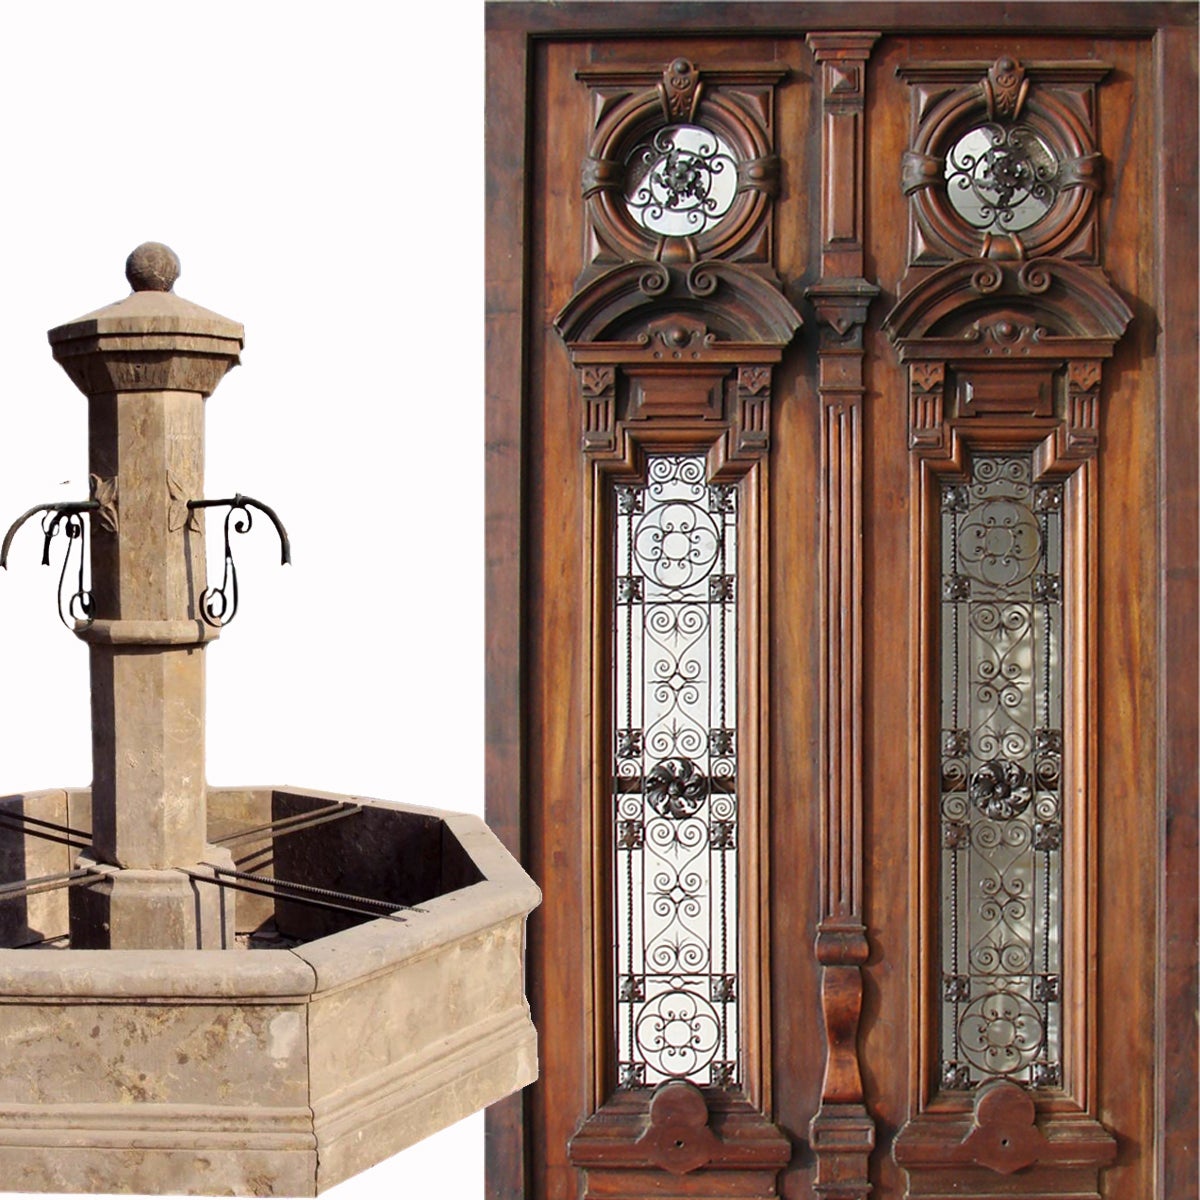 Antique doors complimented by architectural elements